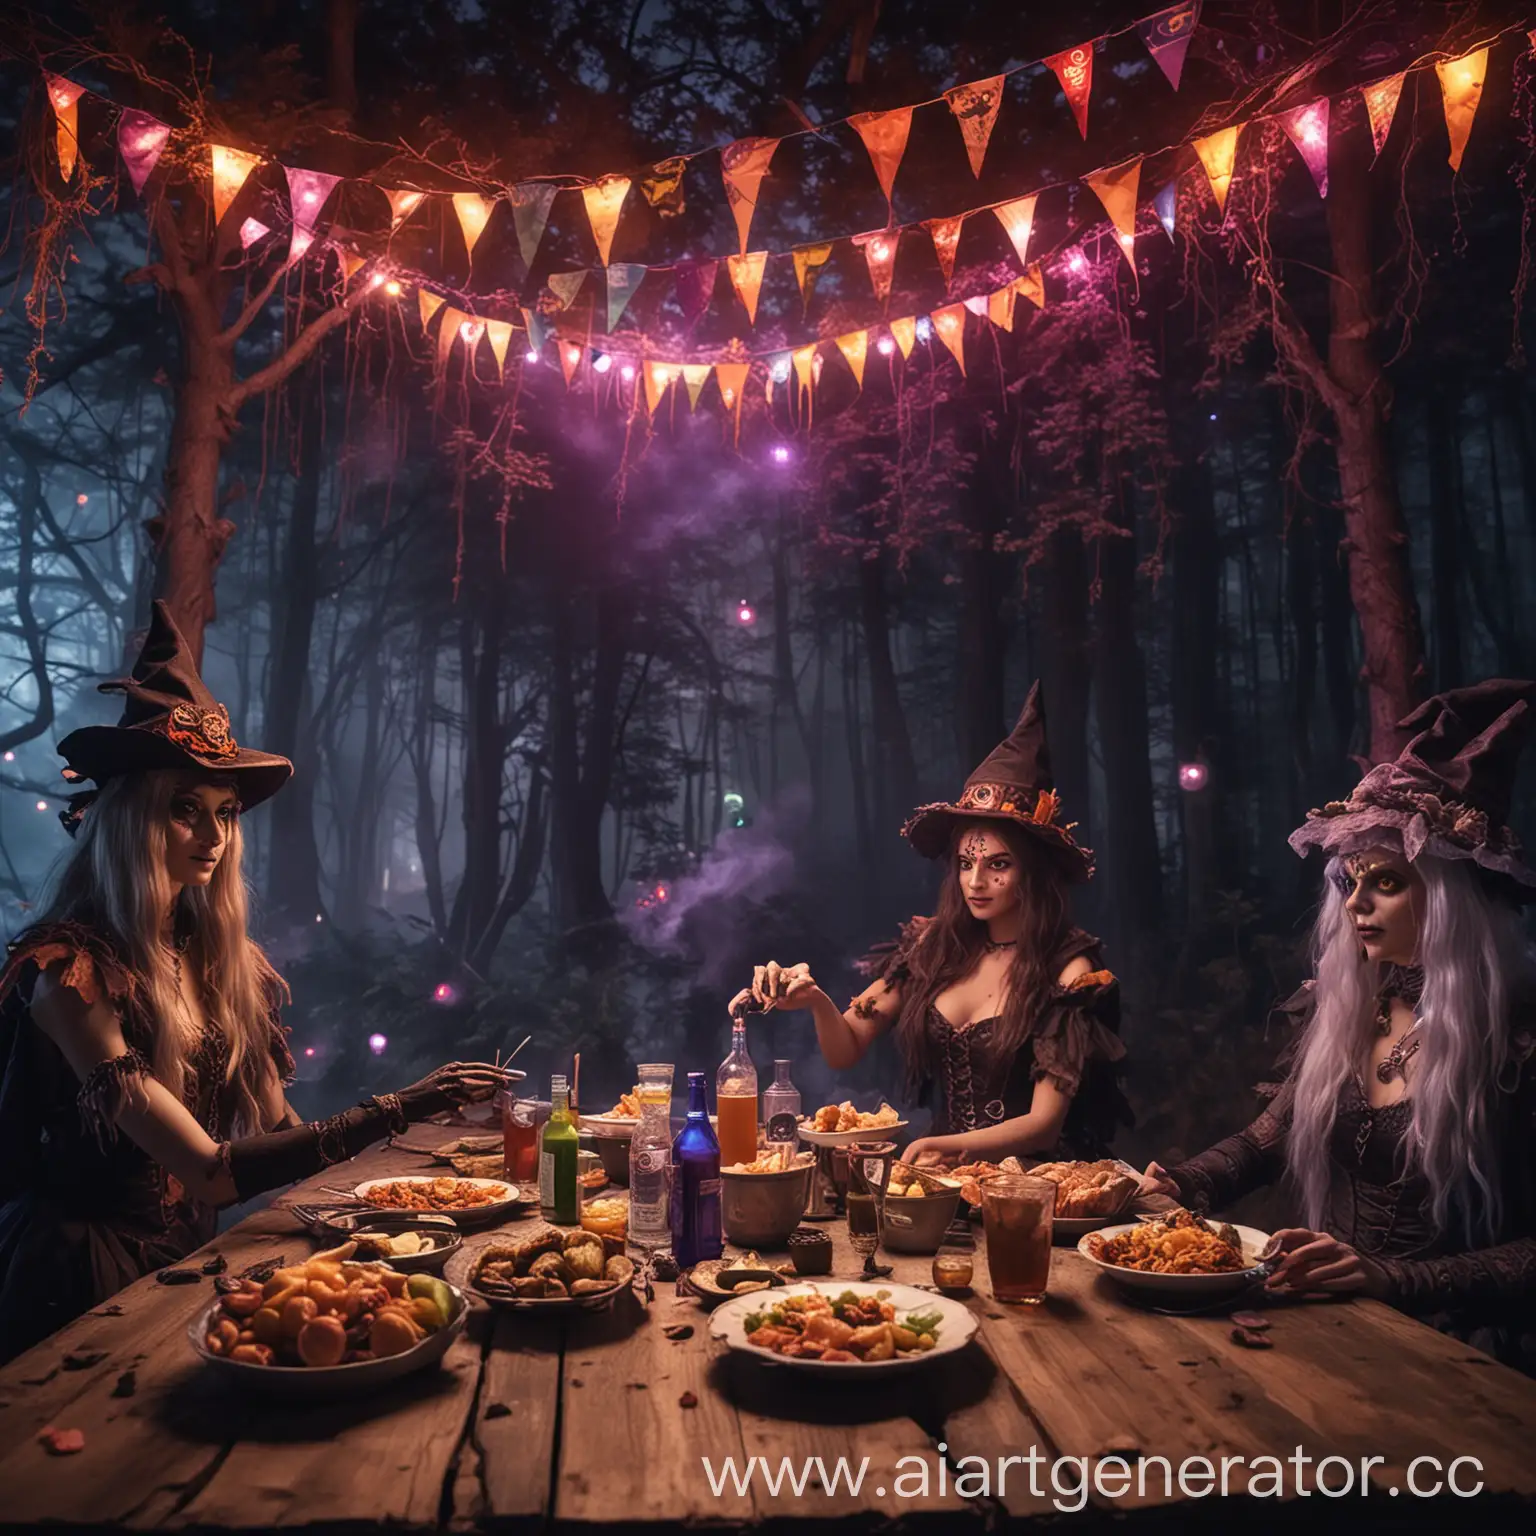 Enchanted-Night-Forest-Gathering-with-UV-Lights-and-Whimsical-Costumes